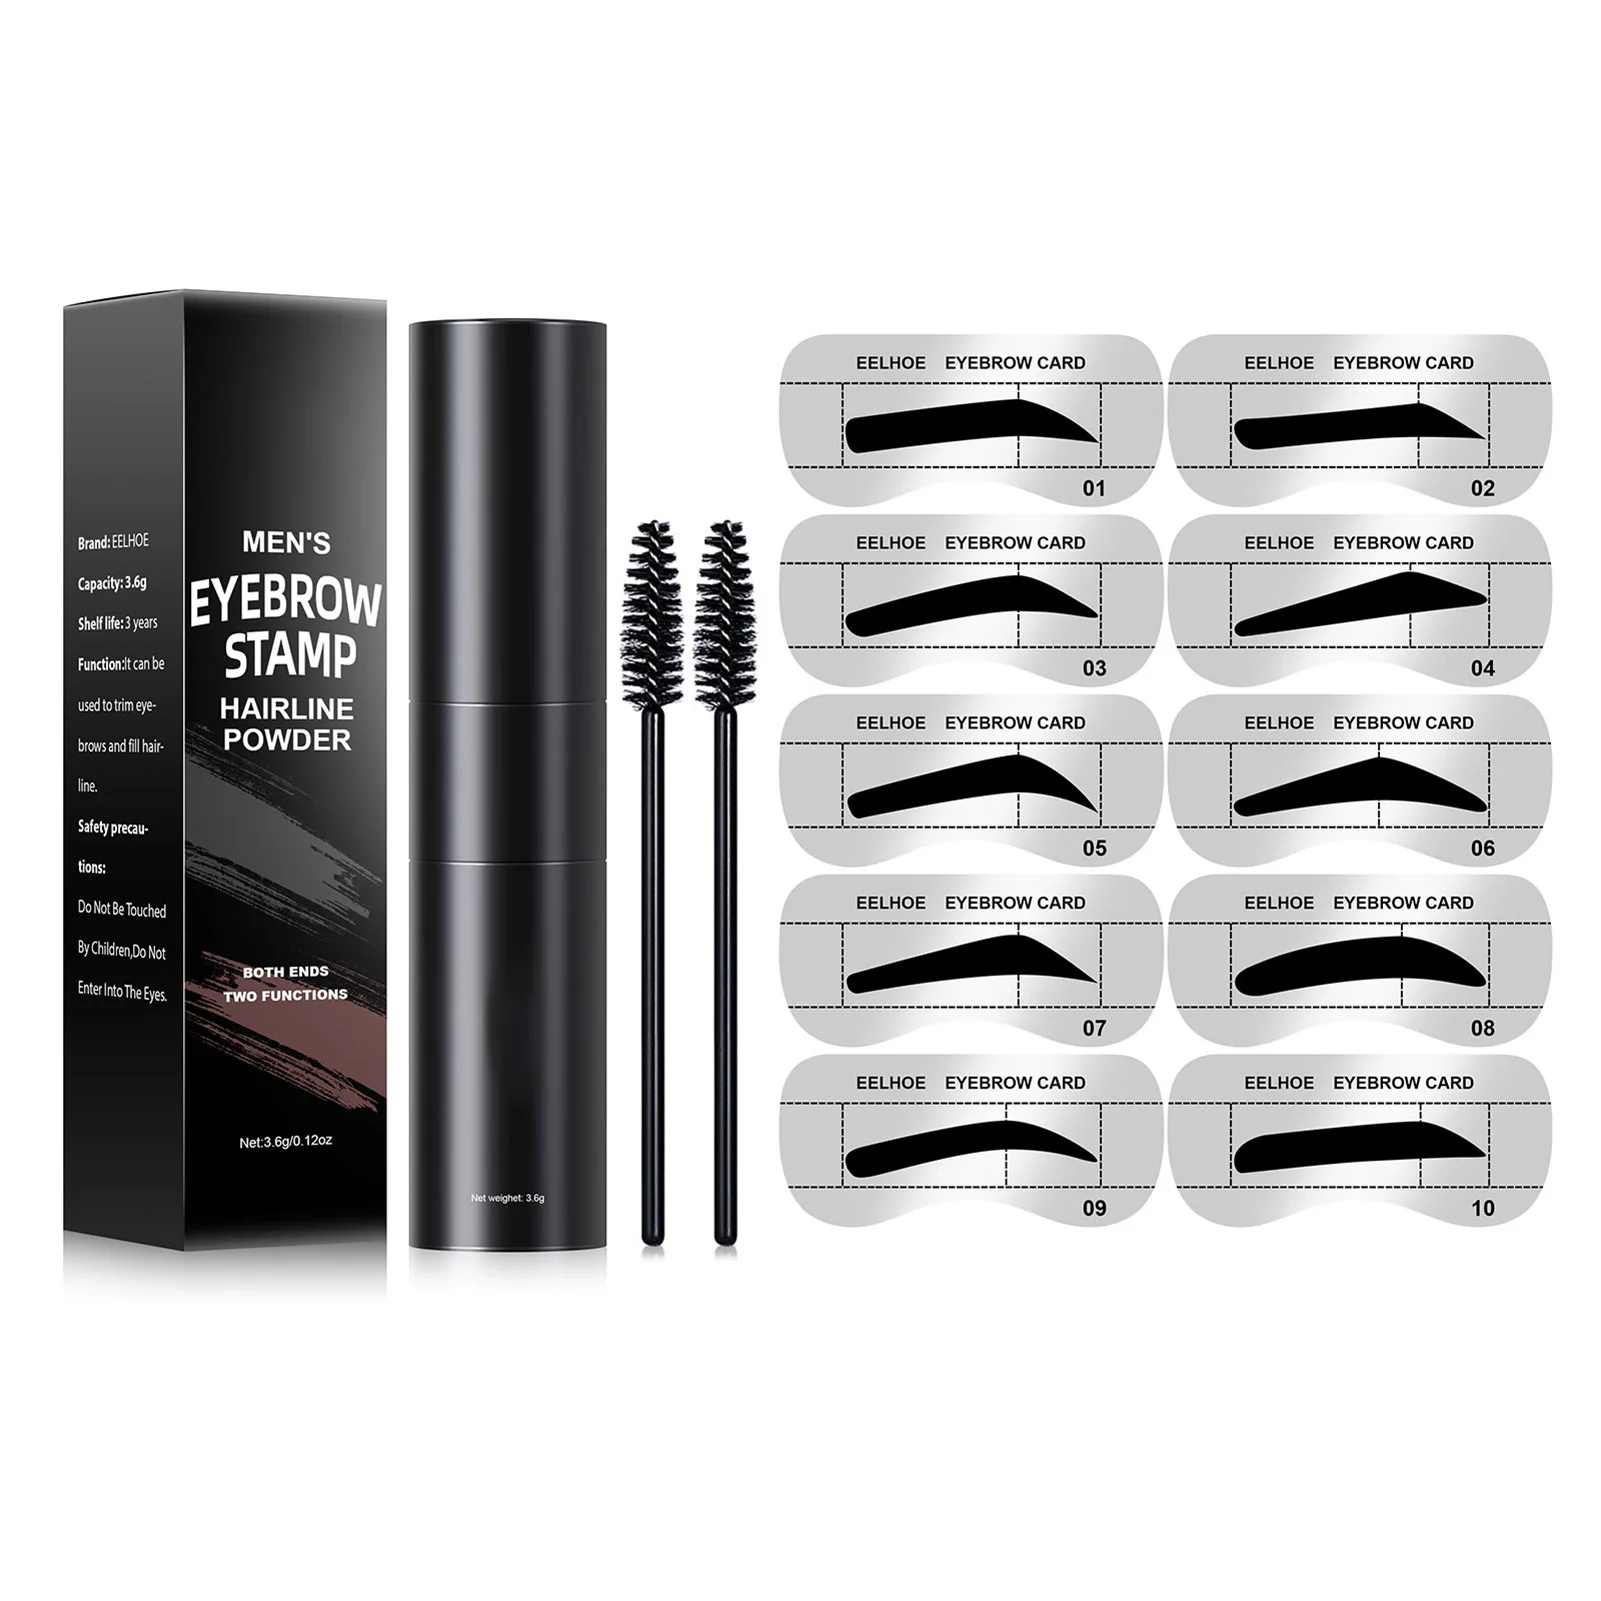 

Eyebrow Stamp Waterproof Brow Stencil Kit Eyebrow Definer For Men Hairlines Shadow Powder Stick With 10 Reusable Eyebrow Stencil